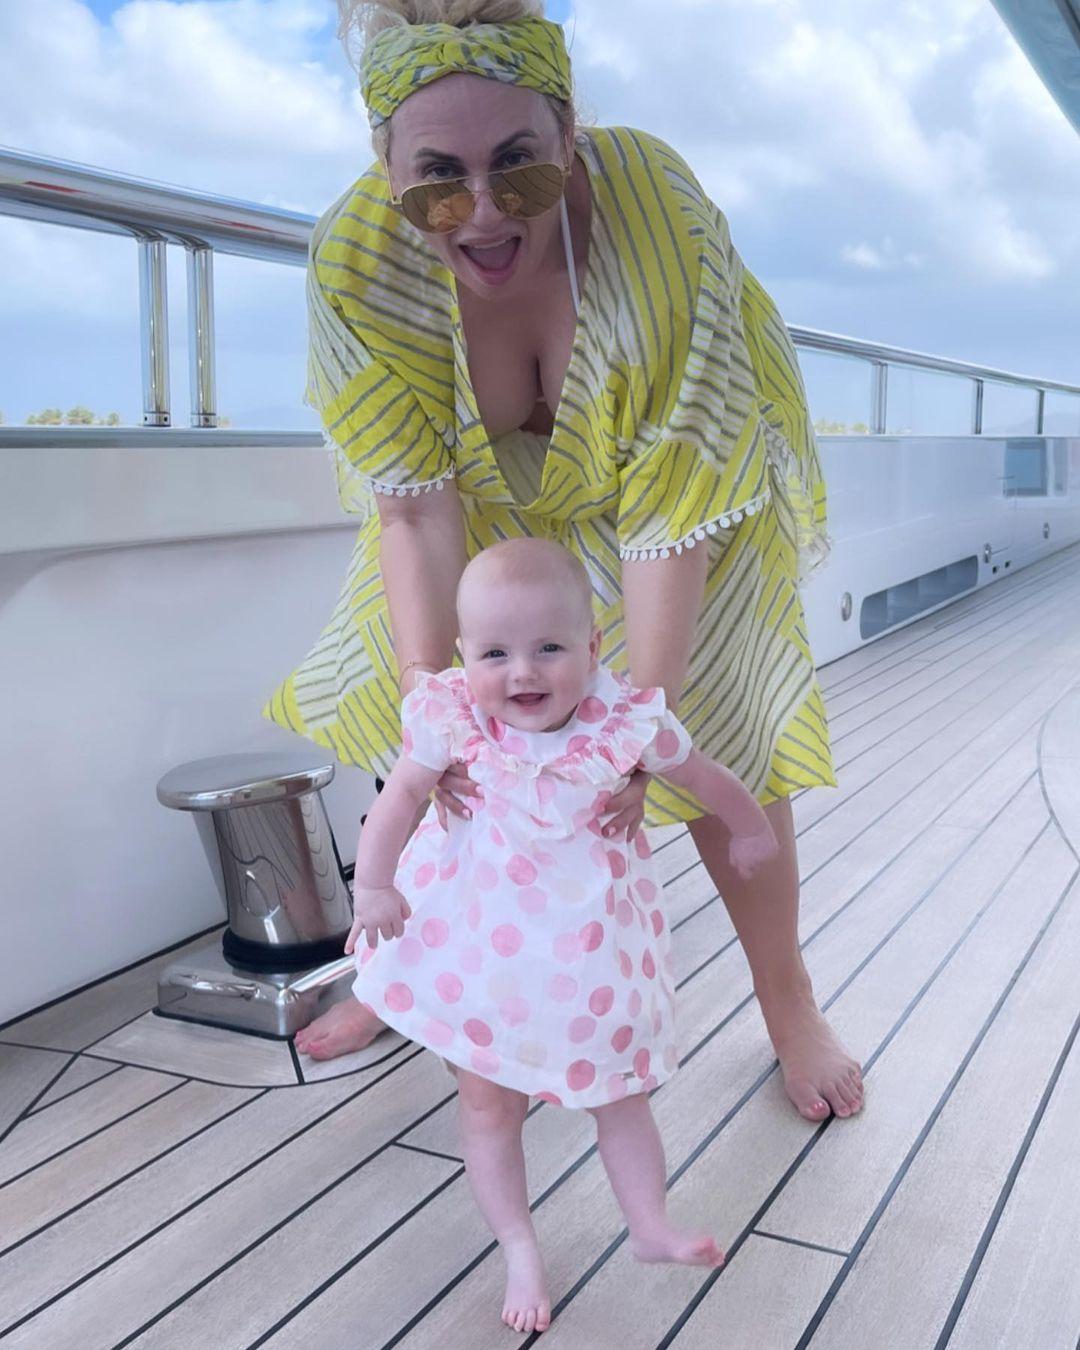 Rebel Wilson Gives Fans Close View Of Daughter's Face To Celebrate First Mother's Day